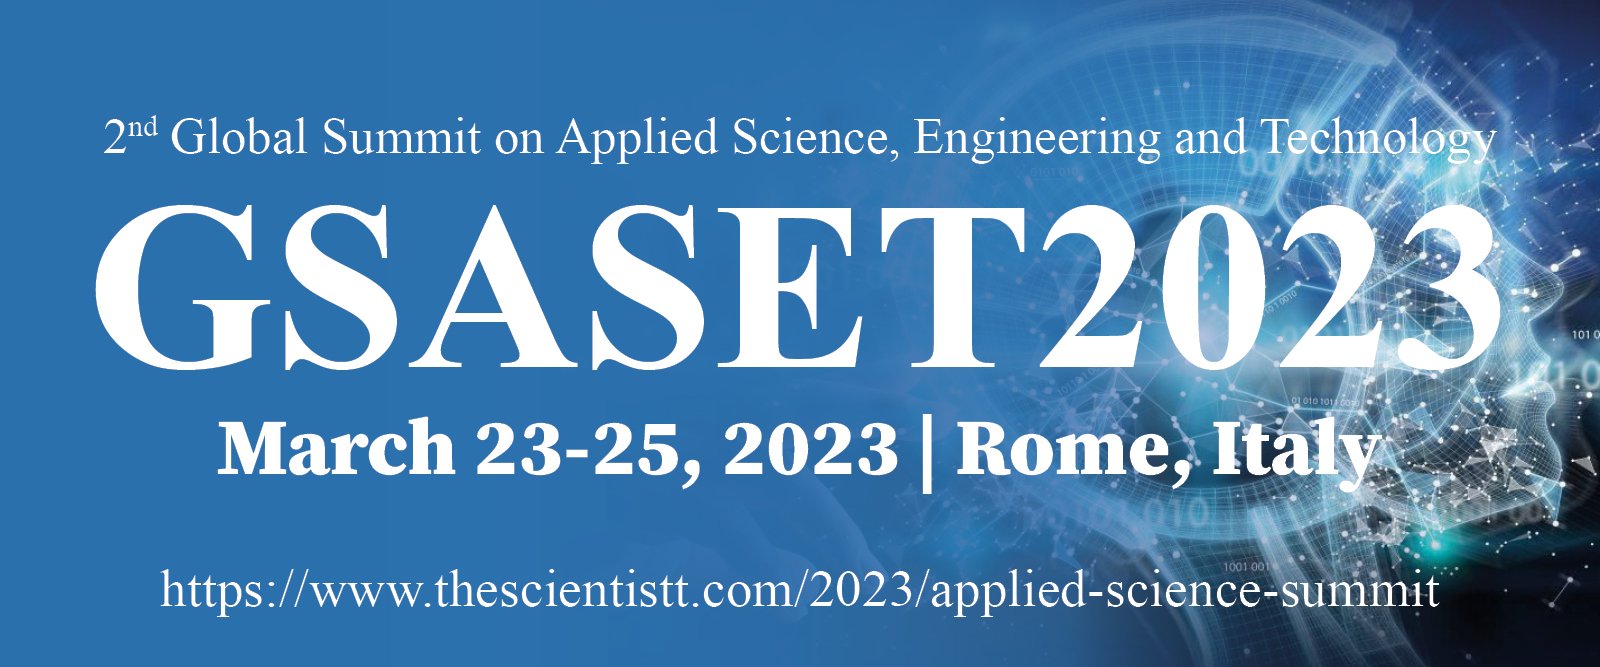 Applied Science Conferences 2023 GSASET2023 Rome, Italy